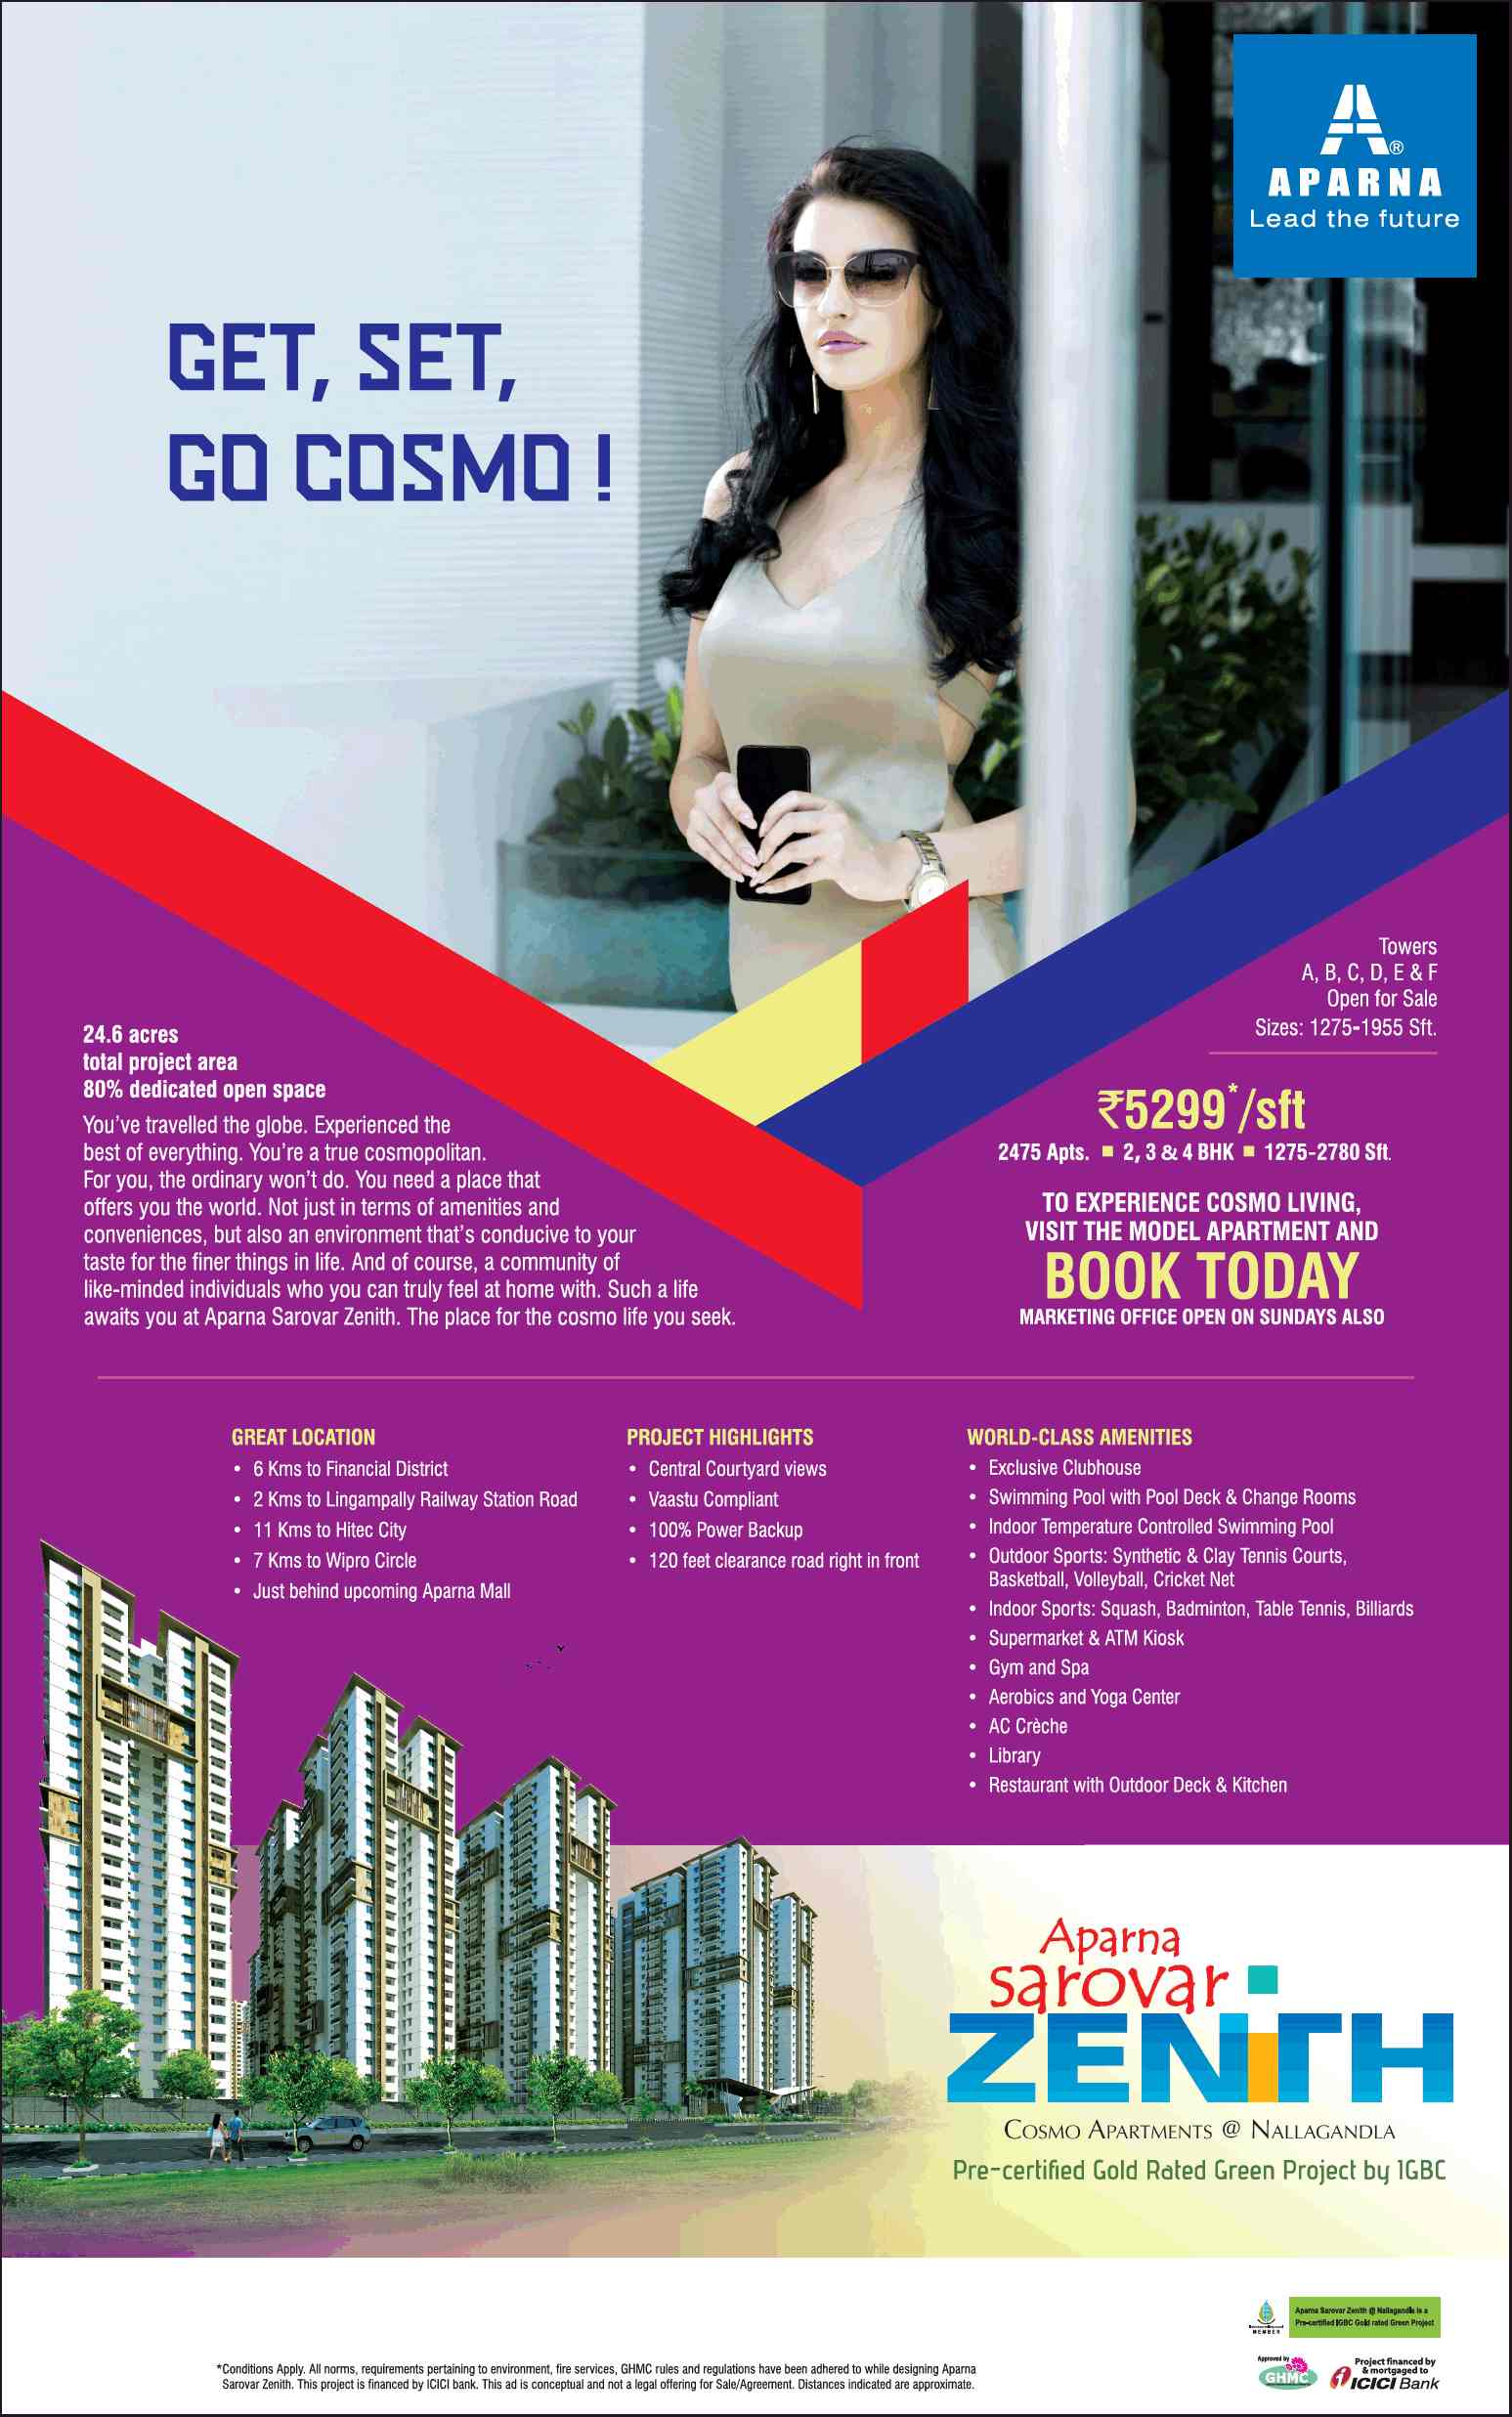 Book your home @ Rs 5299 per sqft at Aparna Sarovar Zenith in Hyderabad